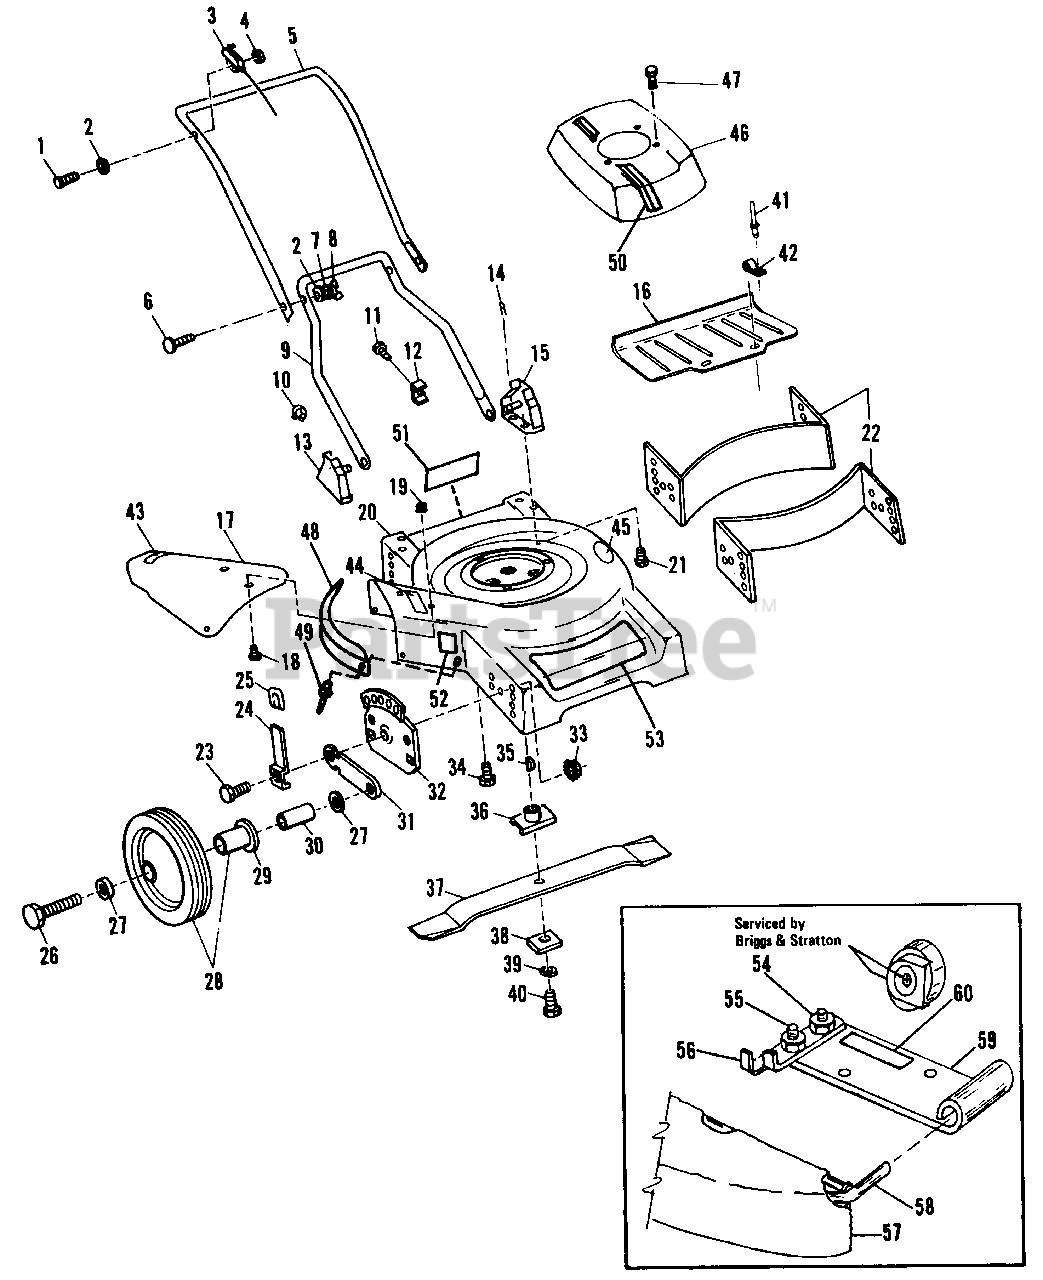 Simplicity 1119 (1690361) - Simplicity 19 Walk-Behind Mower 19 & 21 Side  Discharge Push Mower Parts Lookup with Diagrams